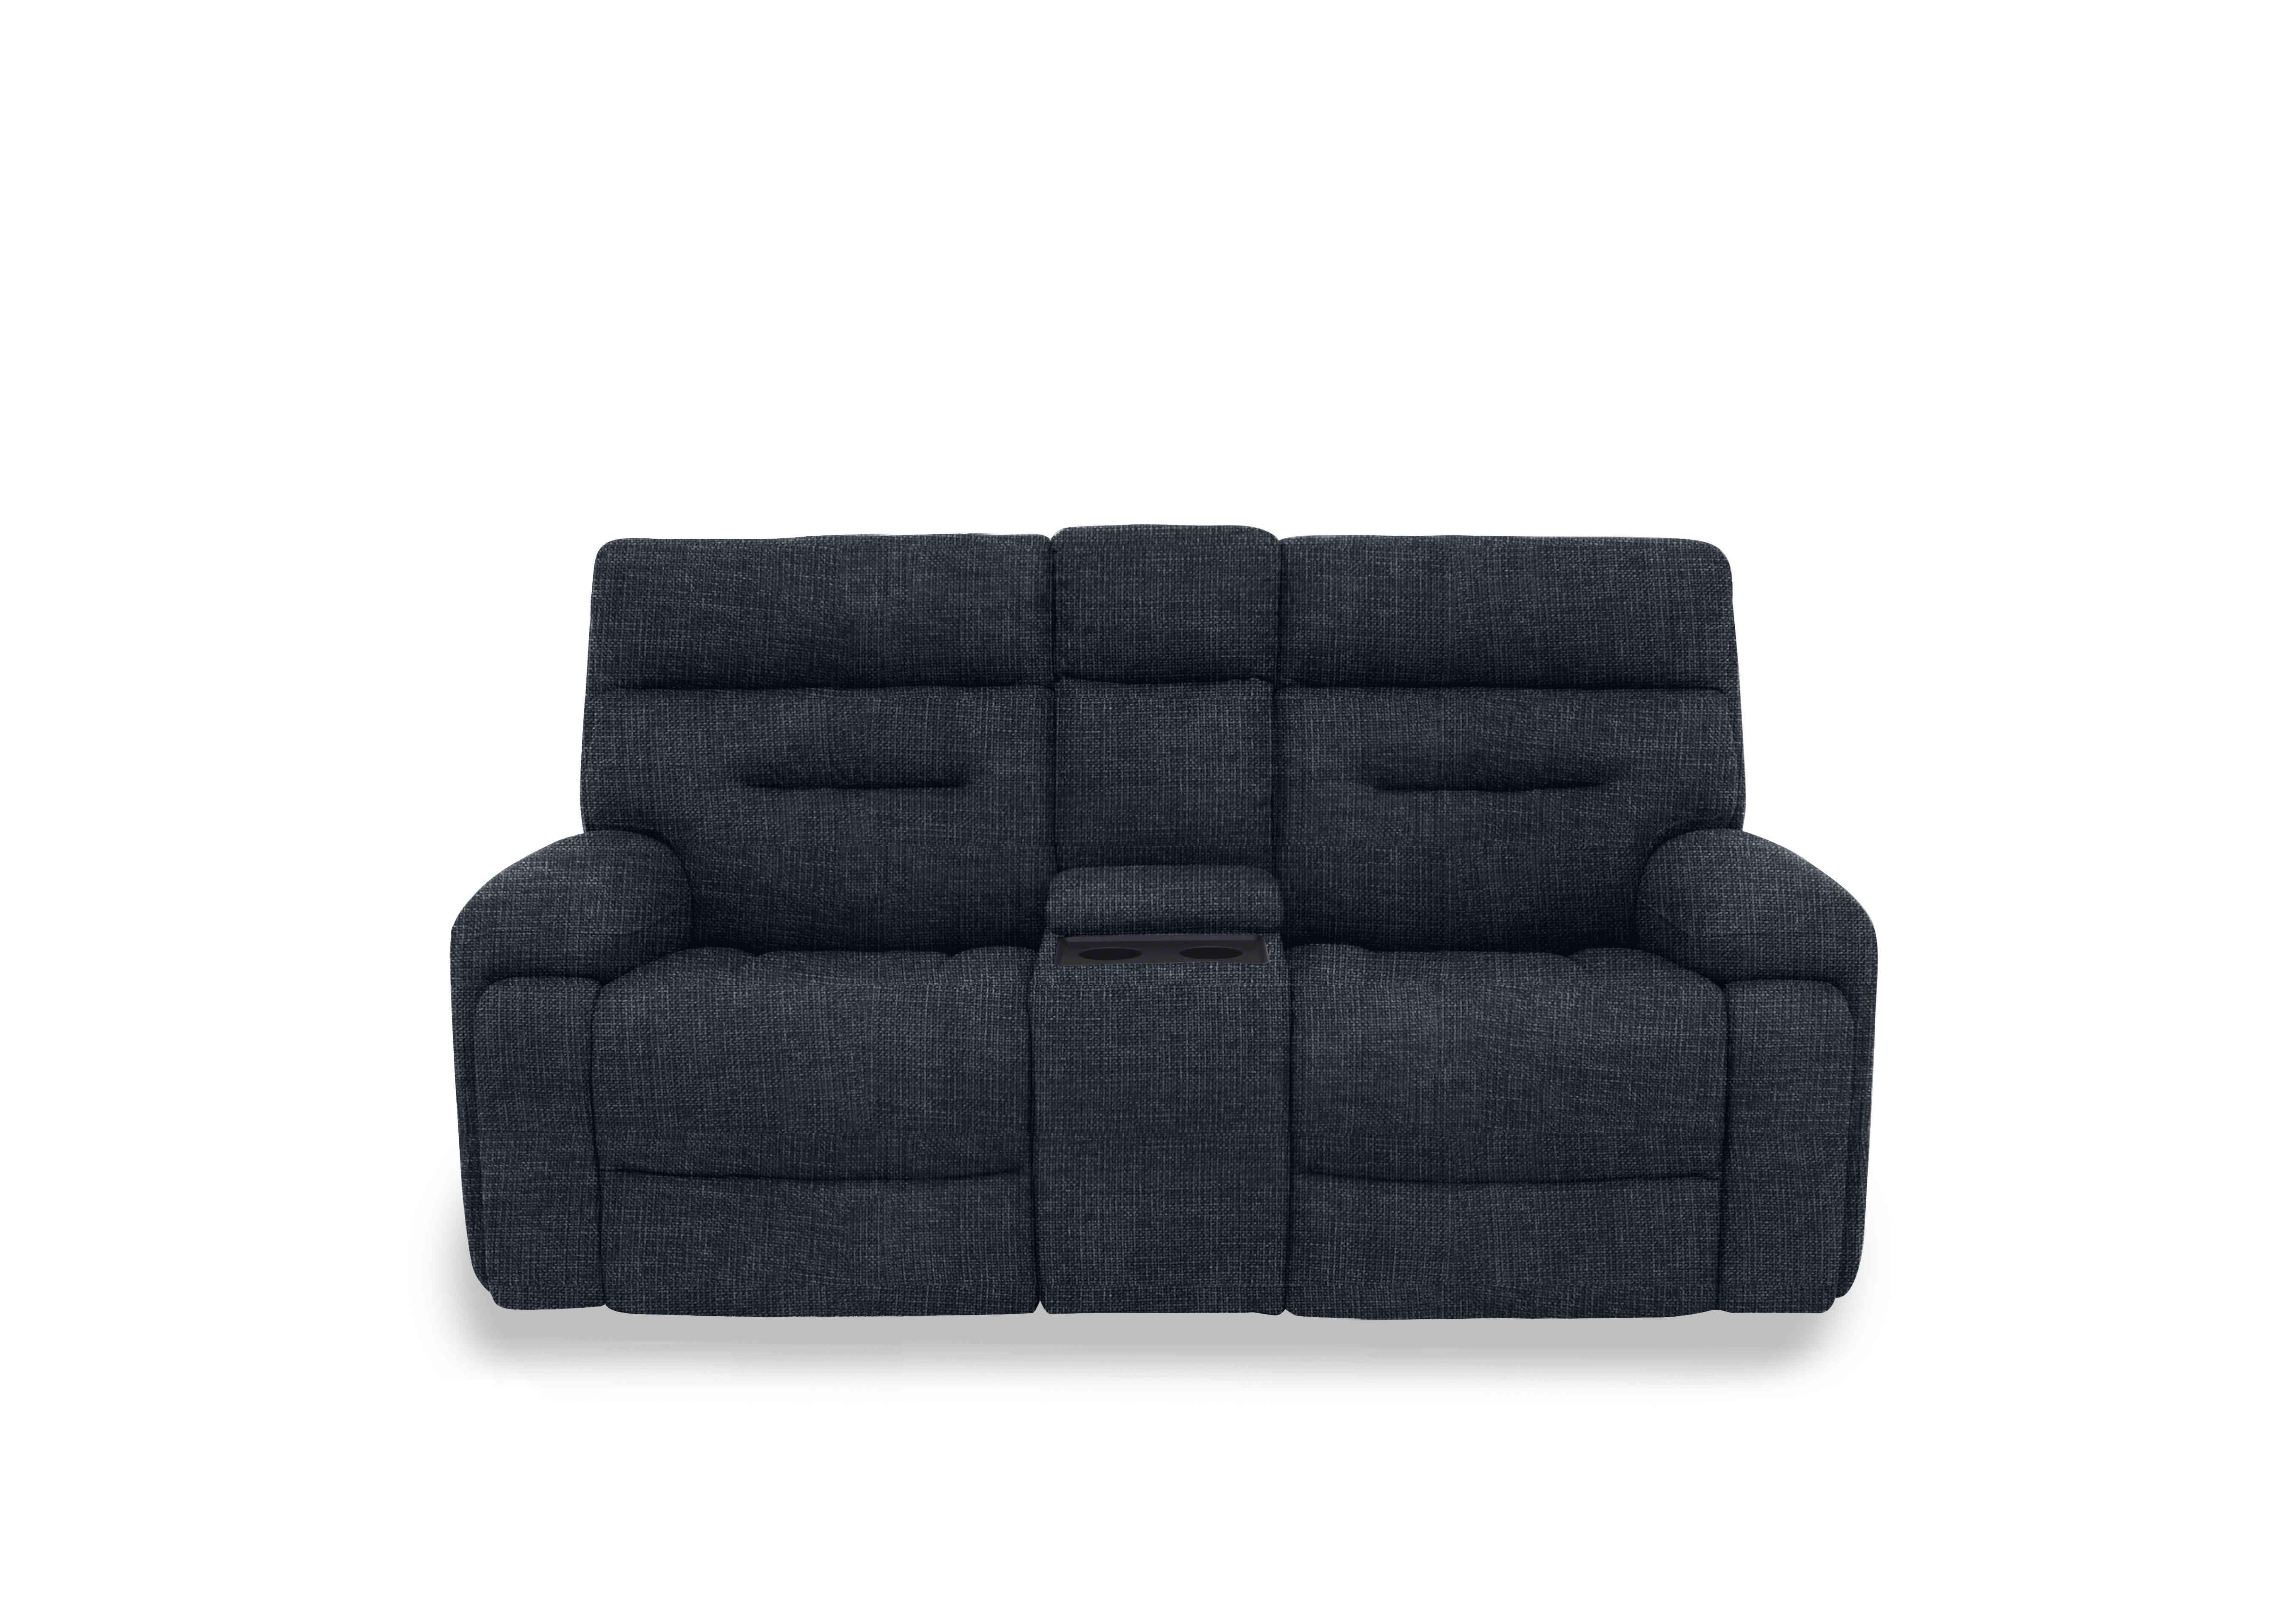 Cinemax Media 2 Seater Fabric Power Recliner Sofa with Power Headrests in Hf-0102 Halifax Black Mica on Furniture Village